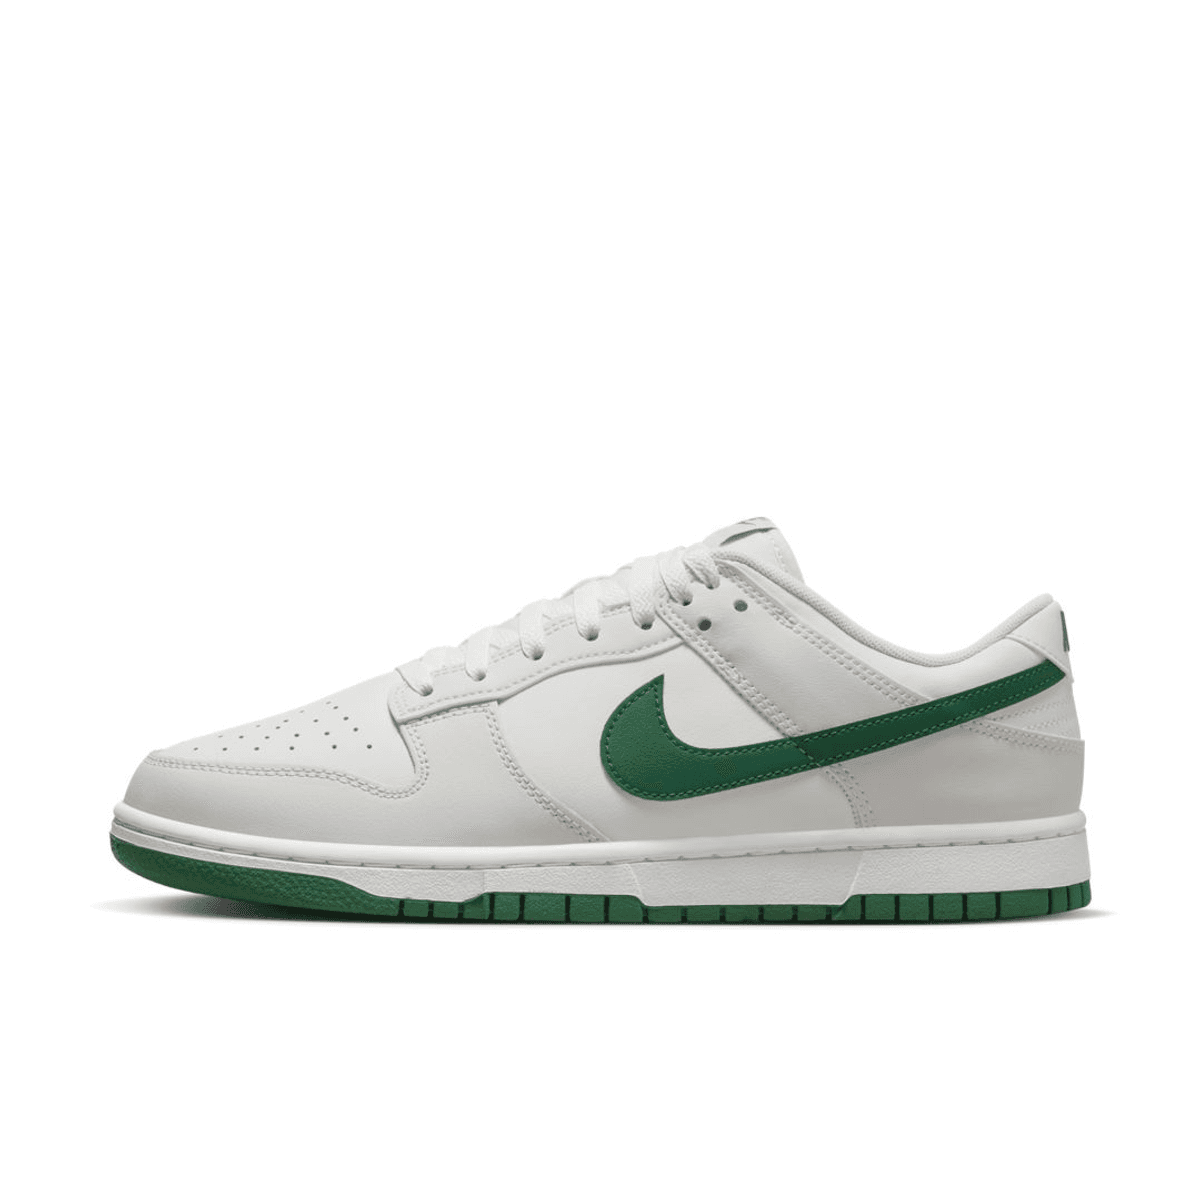 Official Images Of The Nike Dunk Low "Malachite Green"